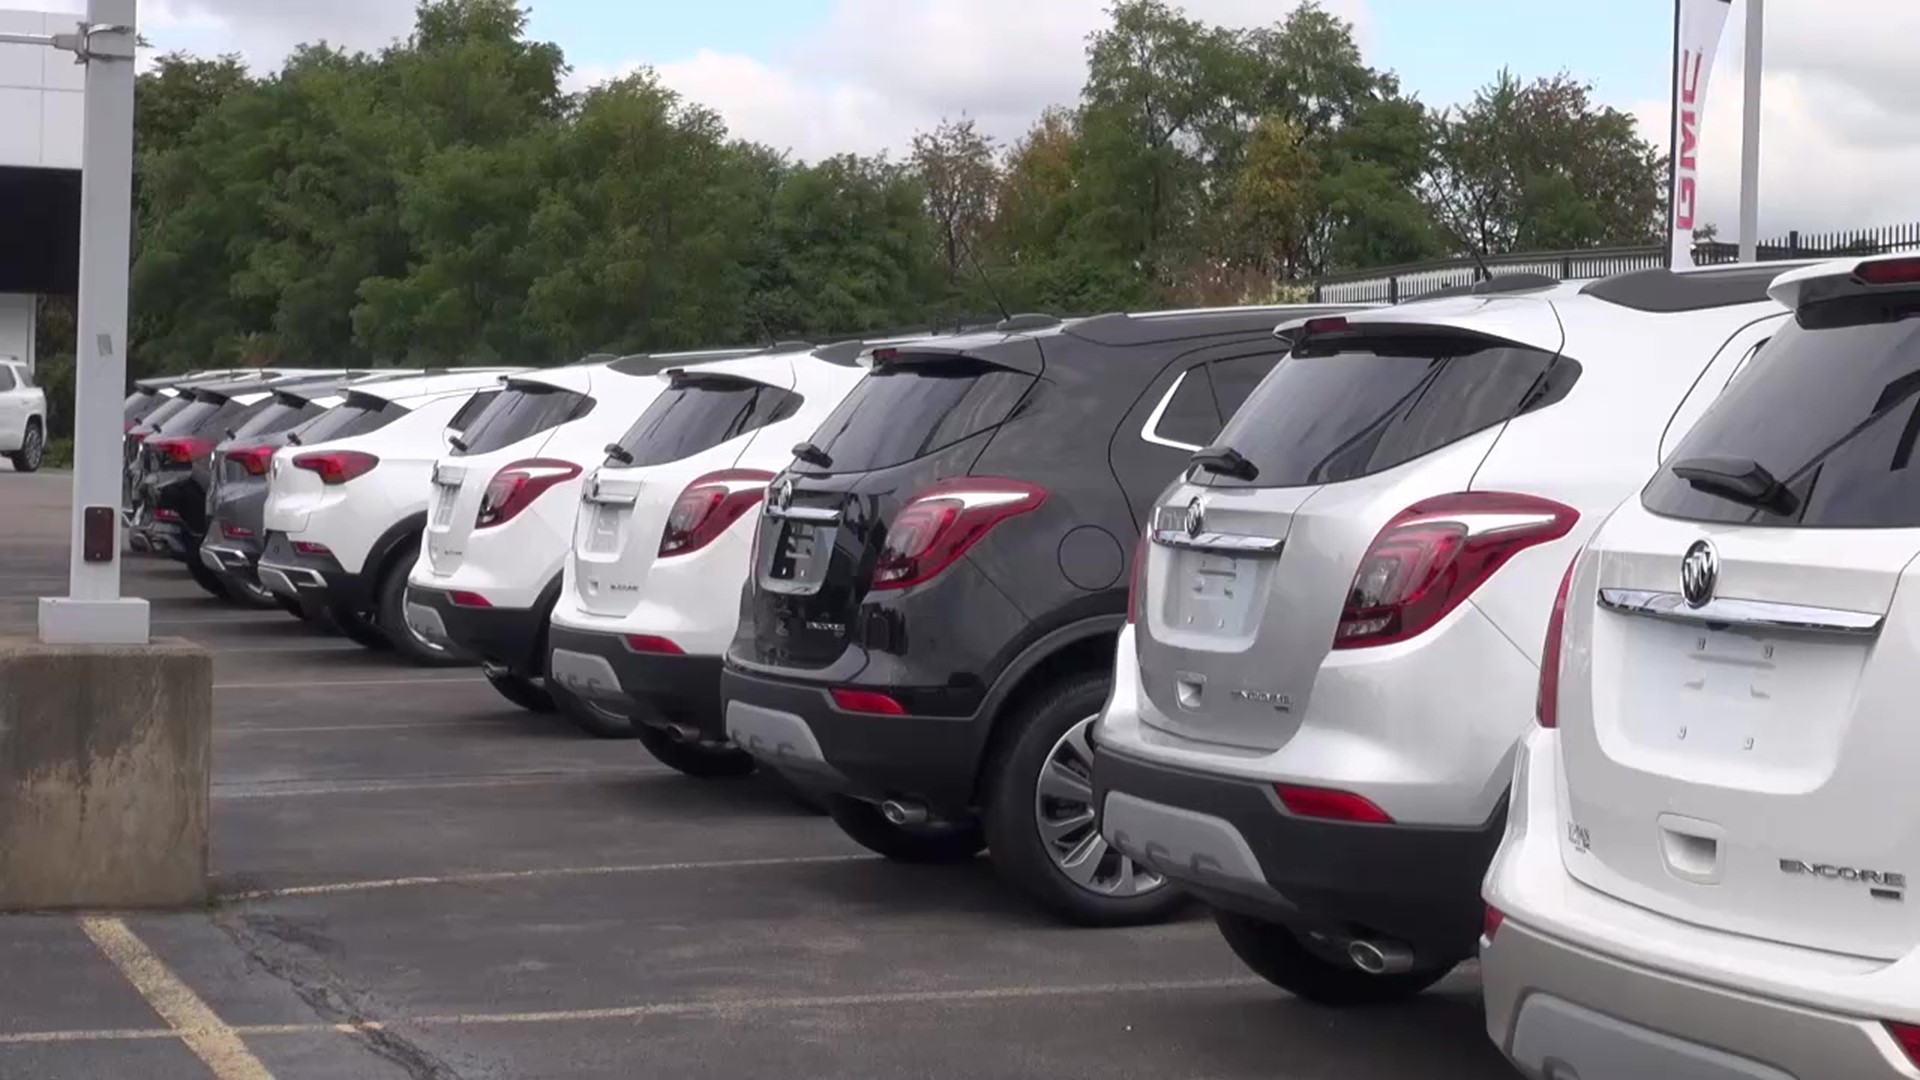 Employees at a car dealership in Lackawanna County say they are seeing improvements every day and are hopeful for a record-breaking fourth quarter.